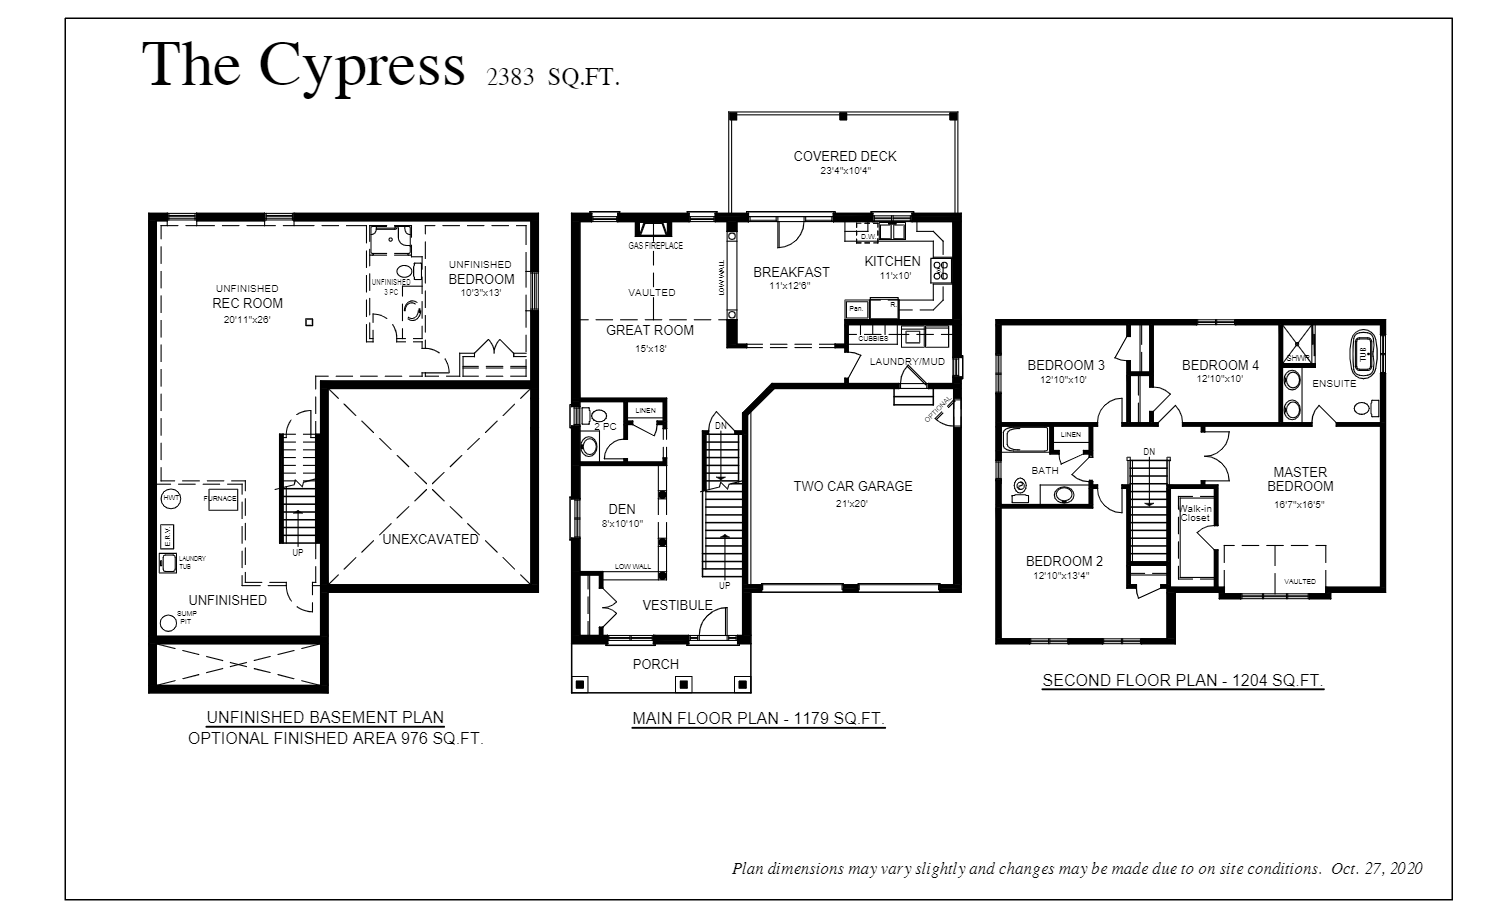  The Cypress  Floor Plan of Meadowlily with undefined beds